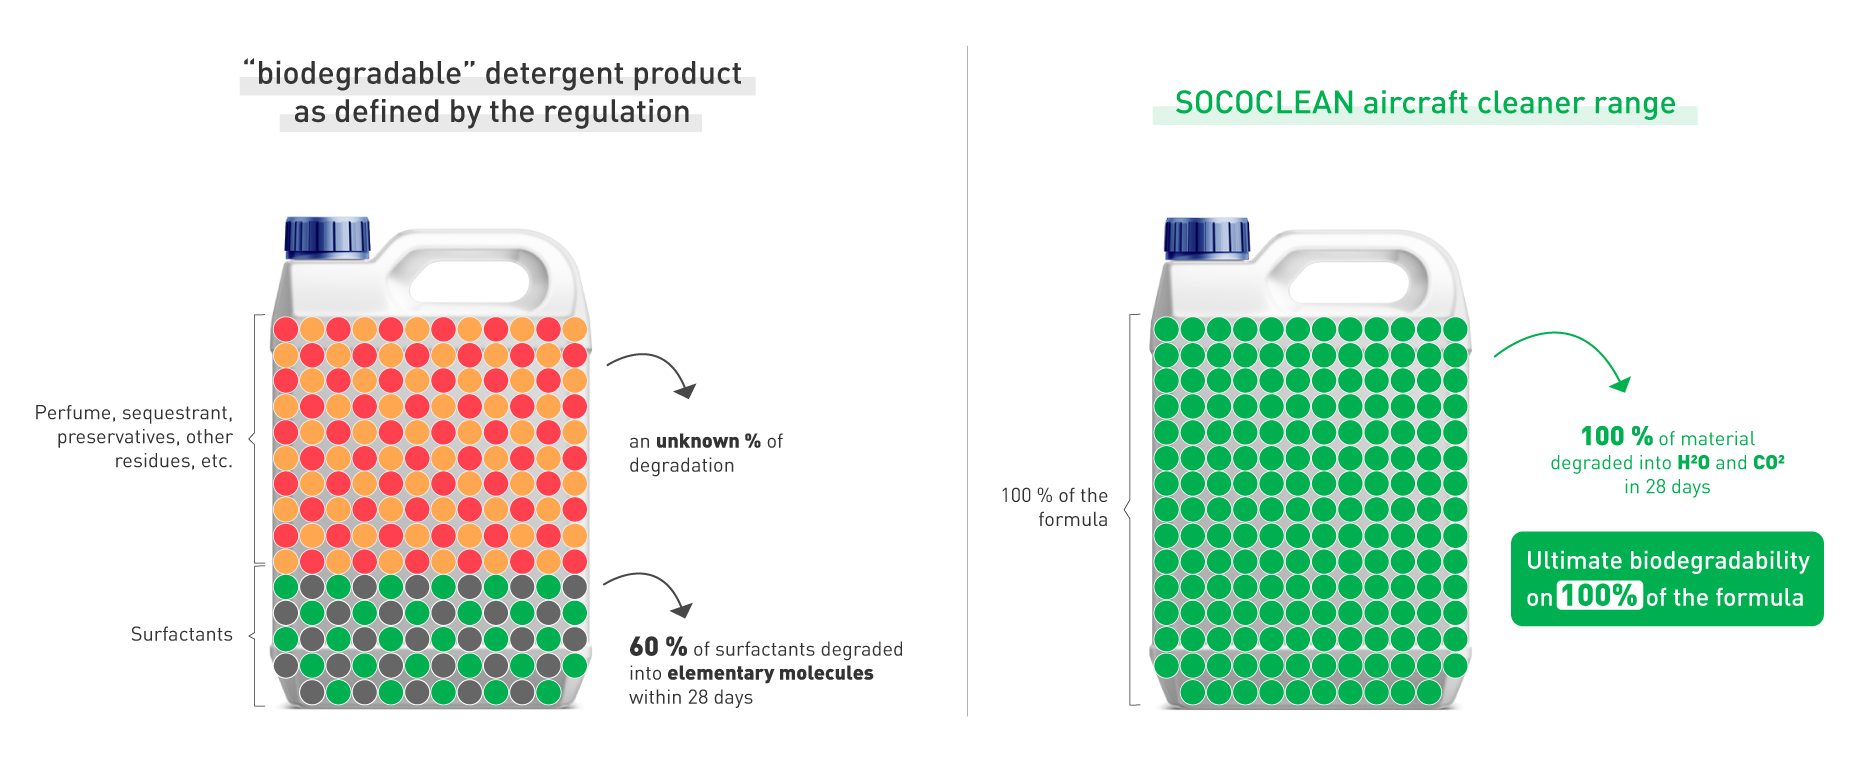 Comparison between competing products called "biodegradable" and our biodegradable cleaners on 100% of the formula